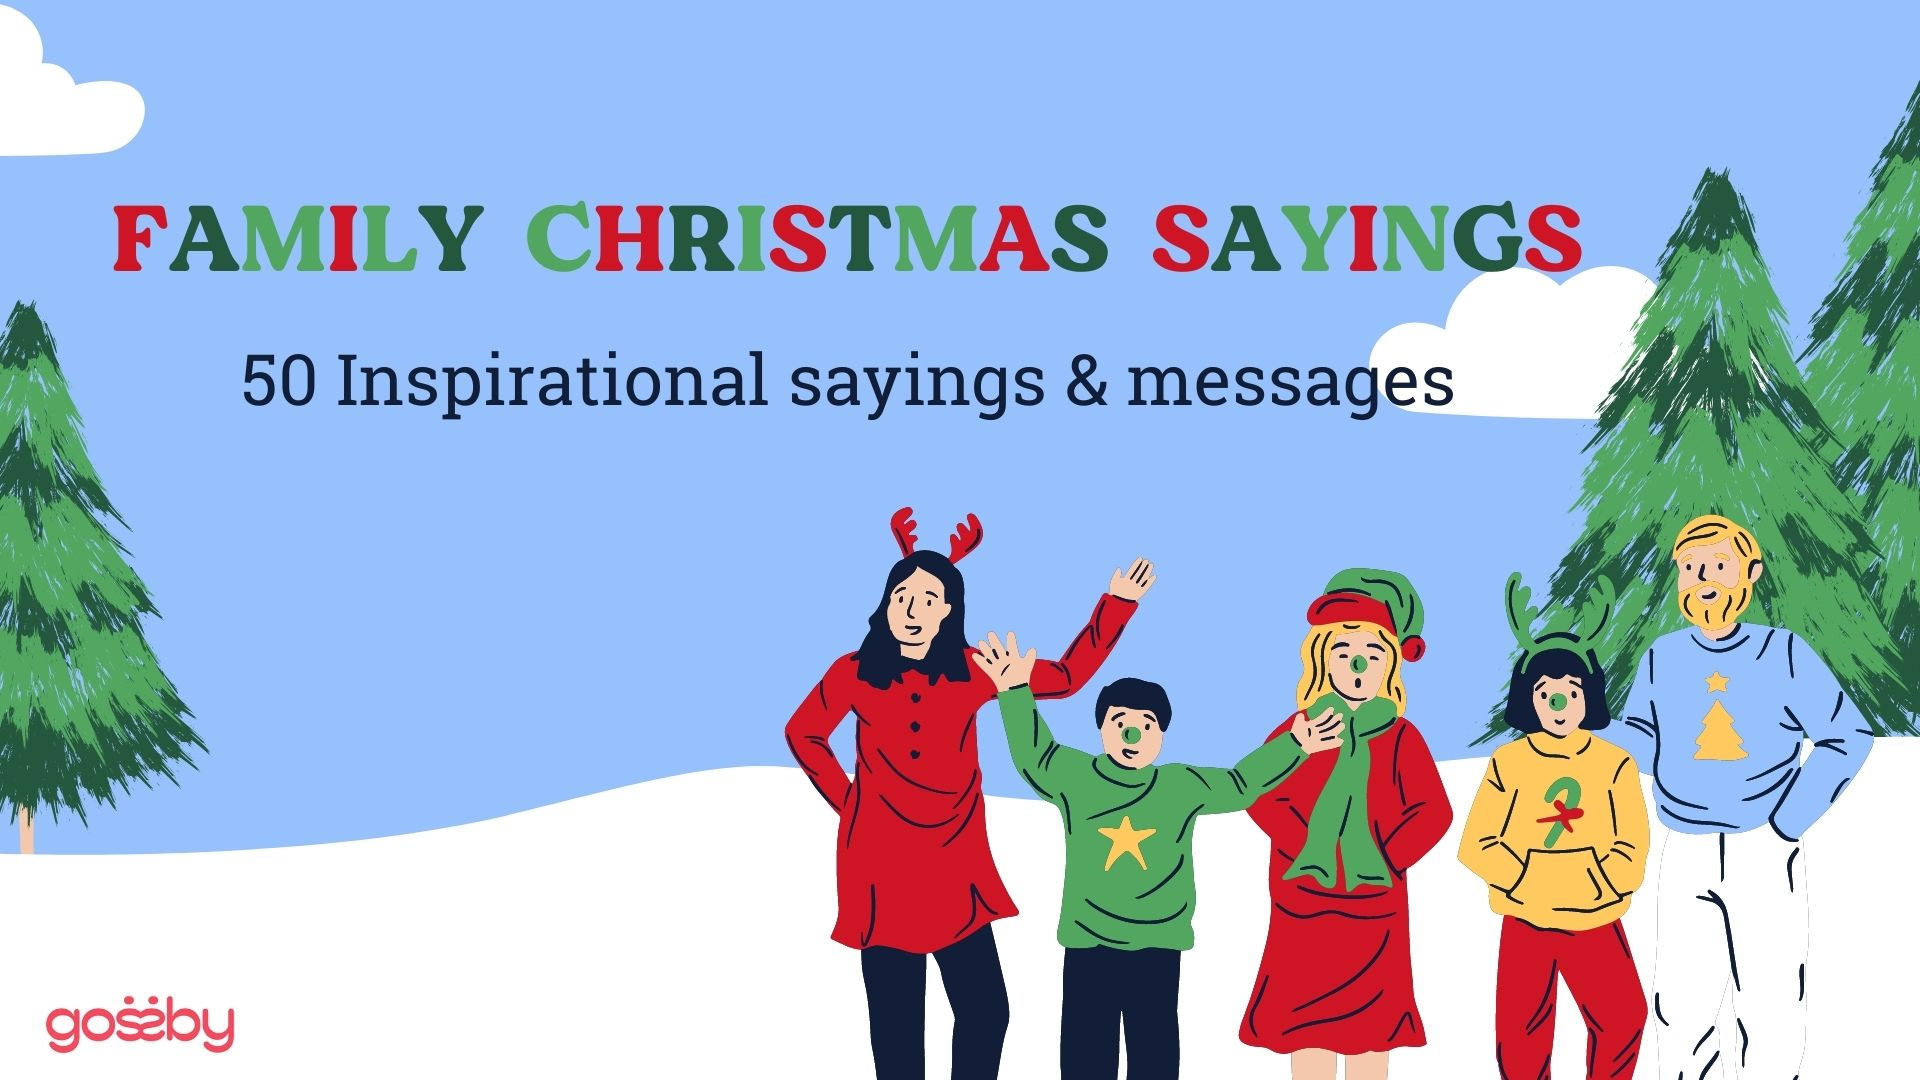 50 Of The Best Christmas Sayings For Family To Enjoy This Holiday Season